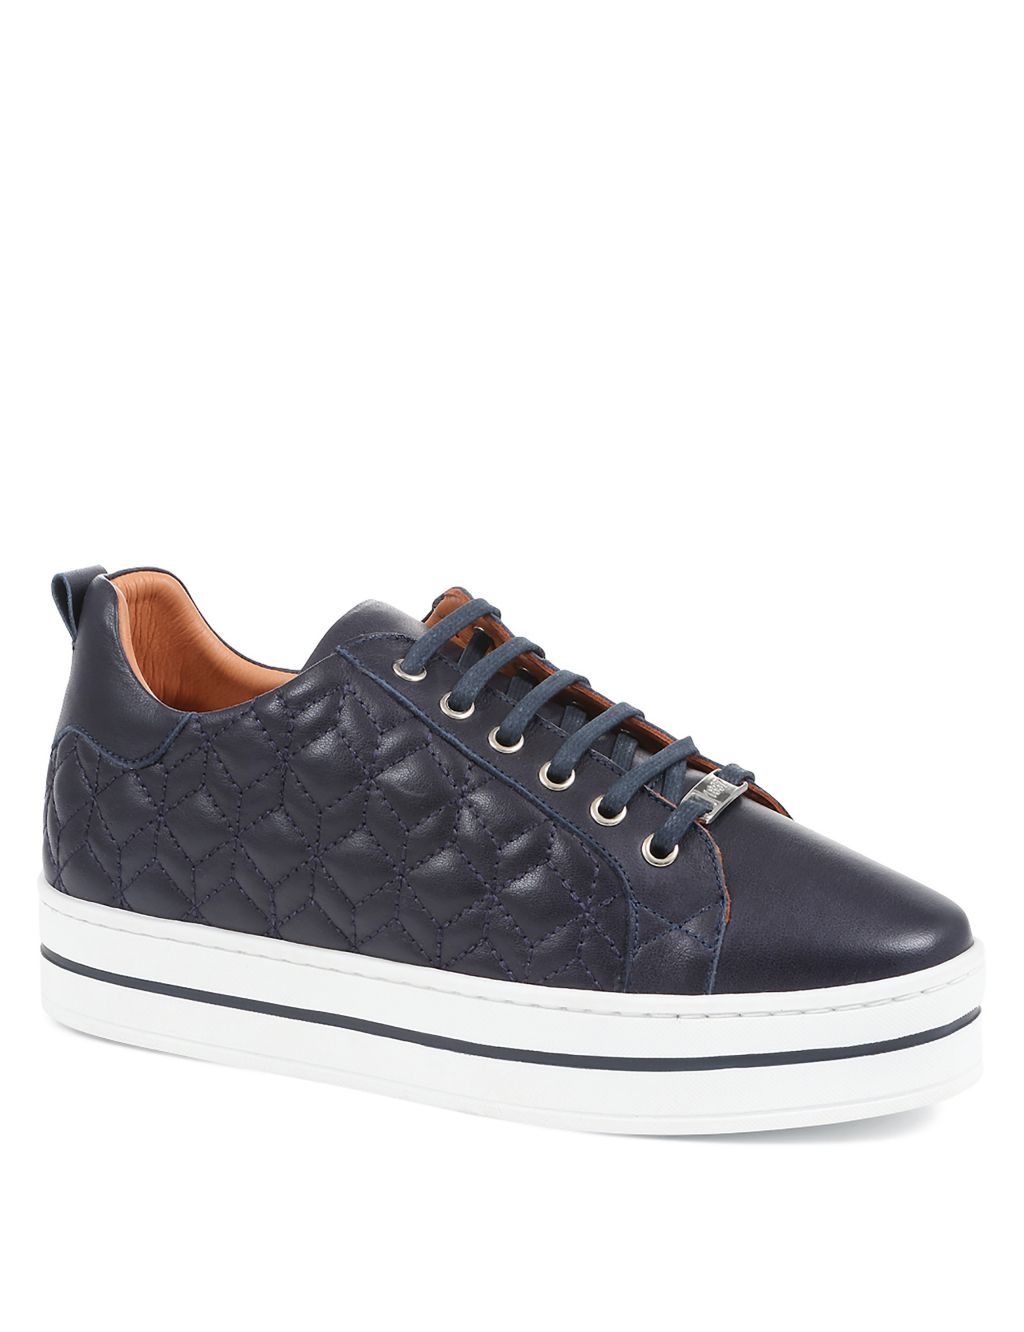 Leather Lace Up Chunky Trainers image 2